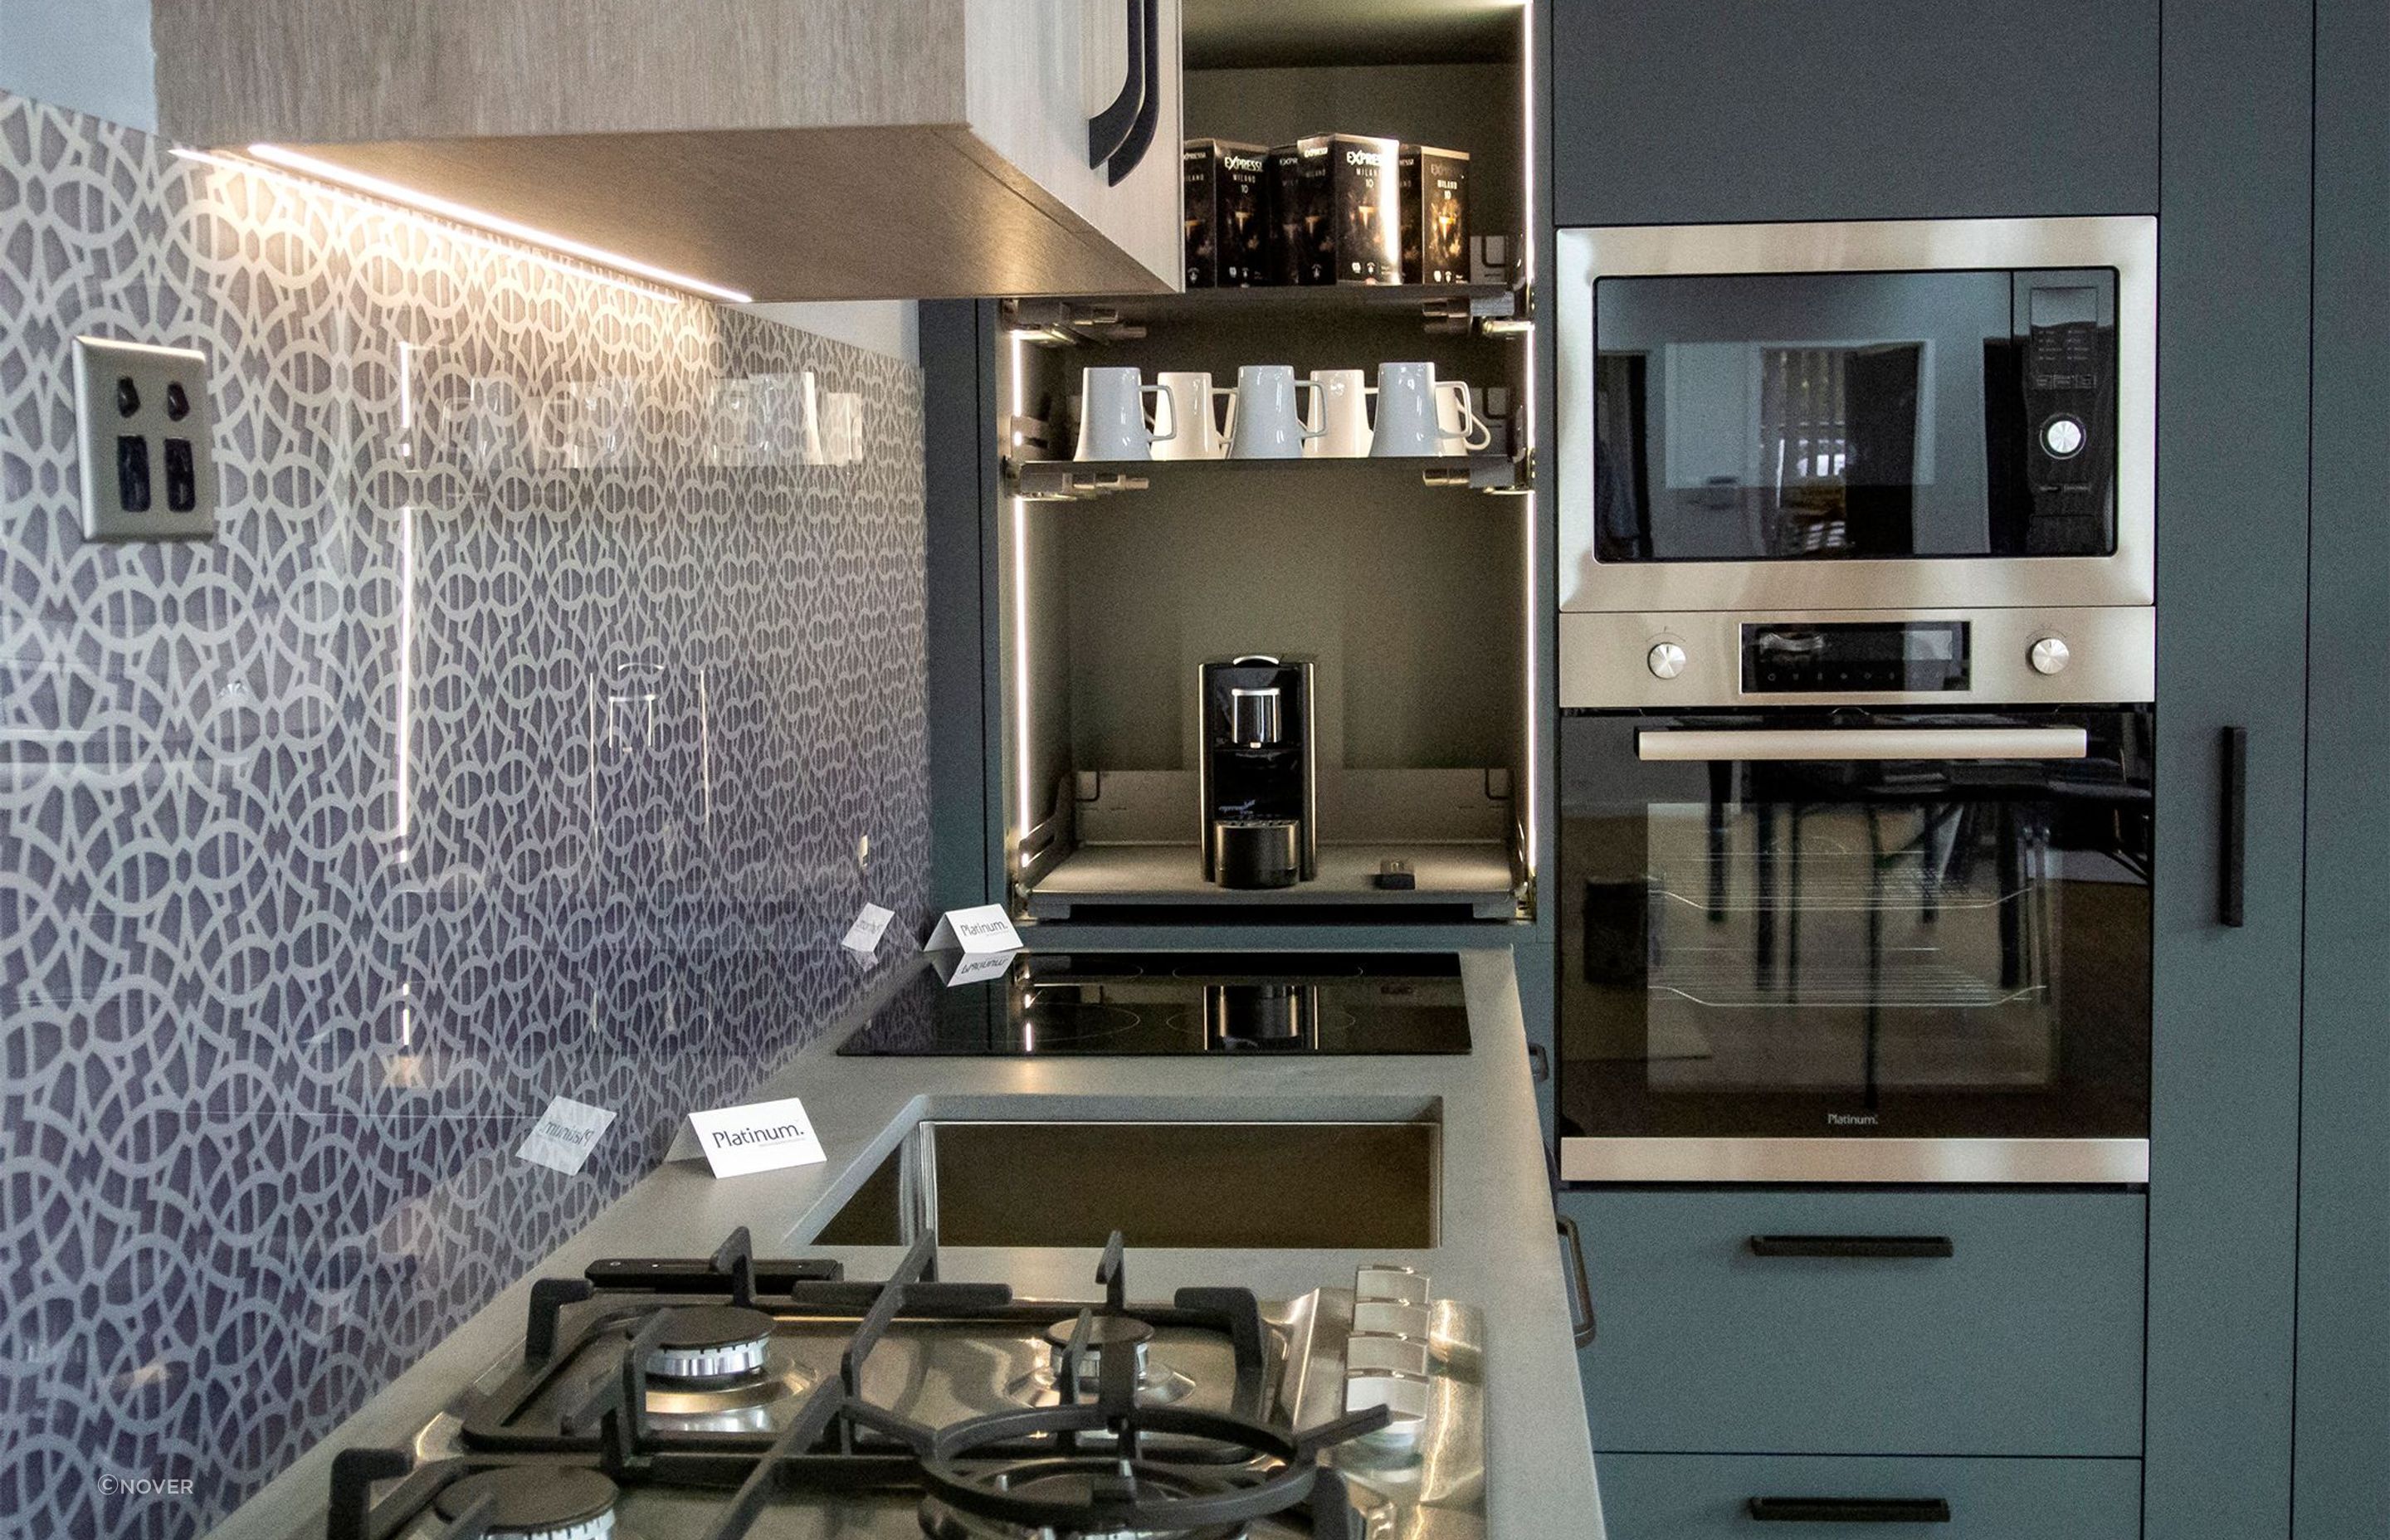 Illuminate your kitchen in style with Nover's neon lighting solutions